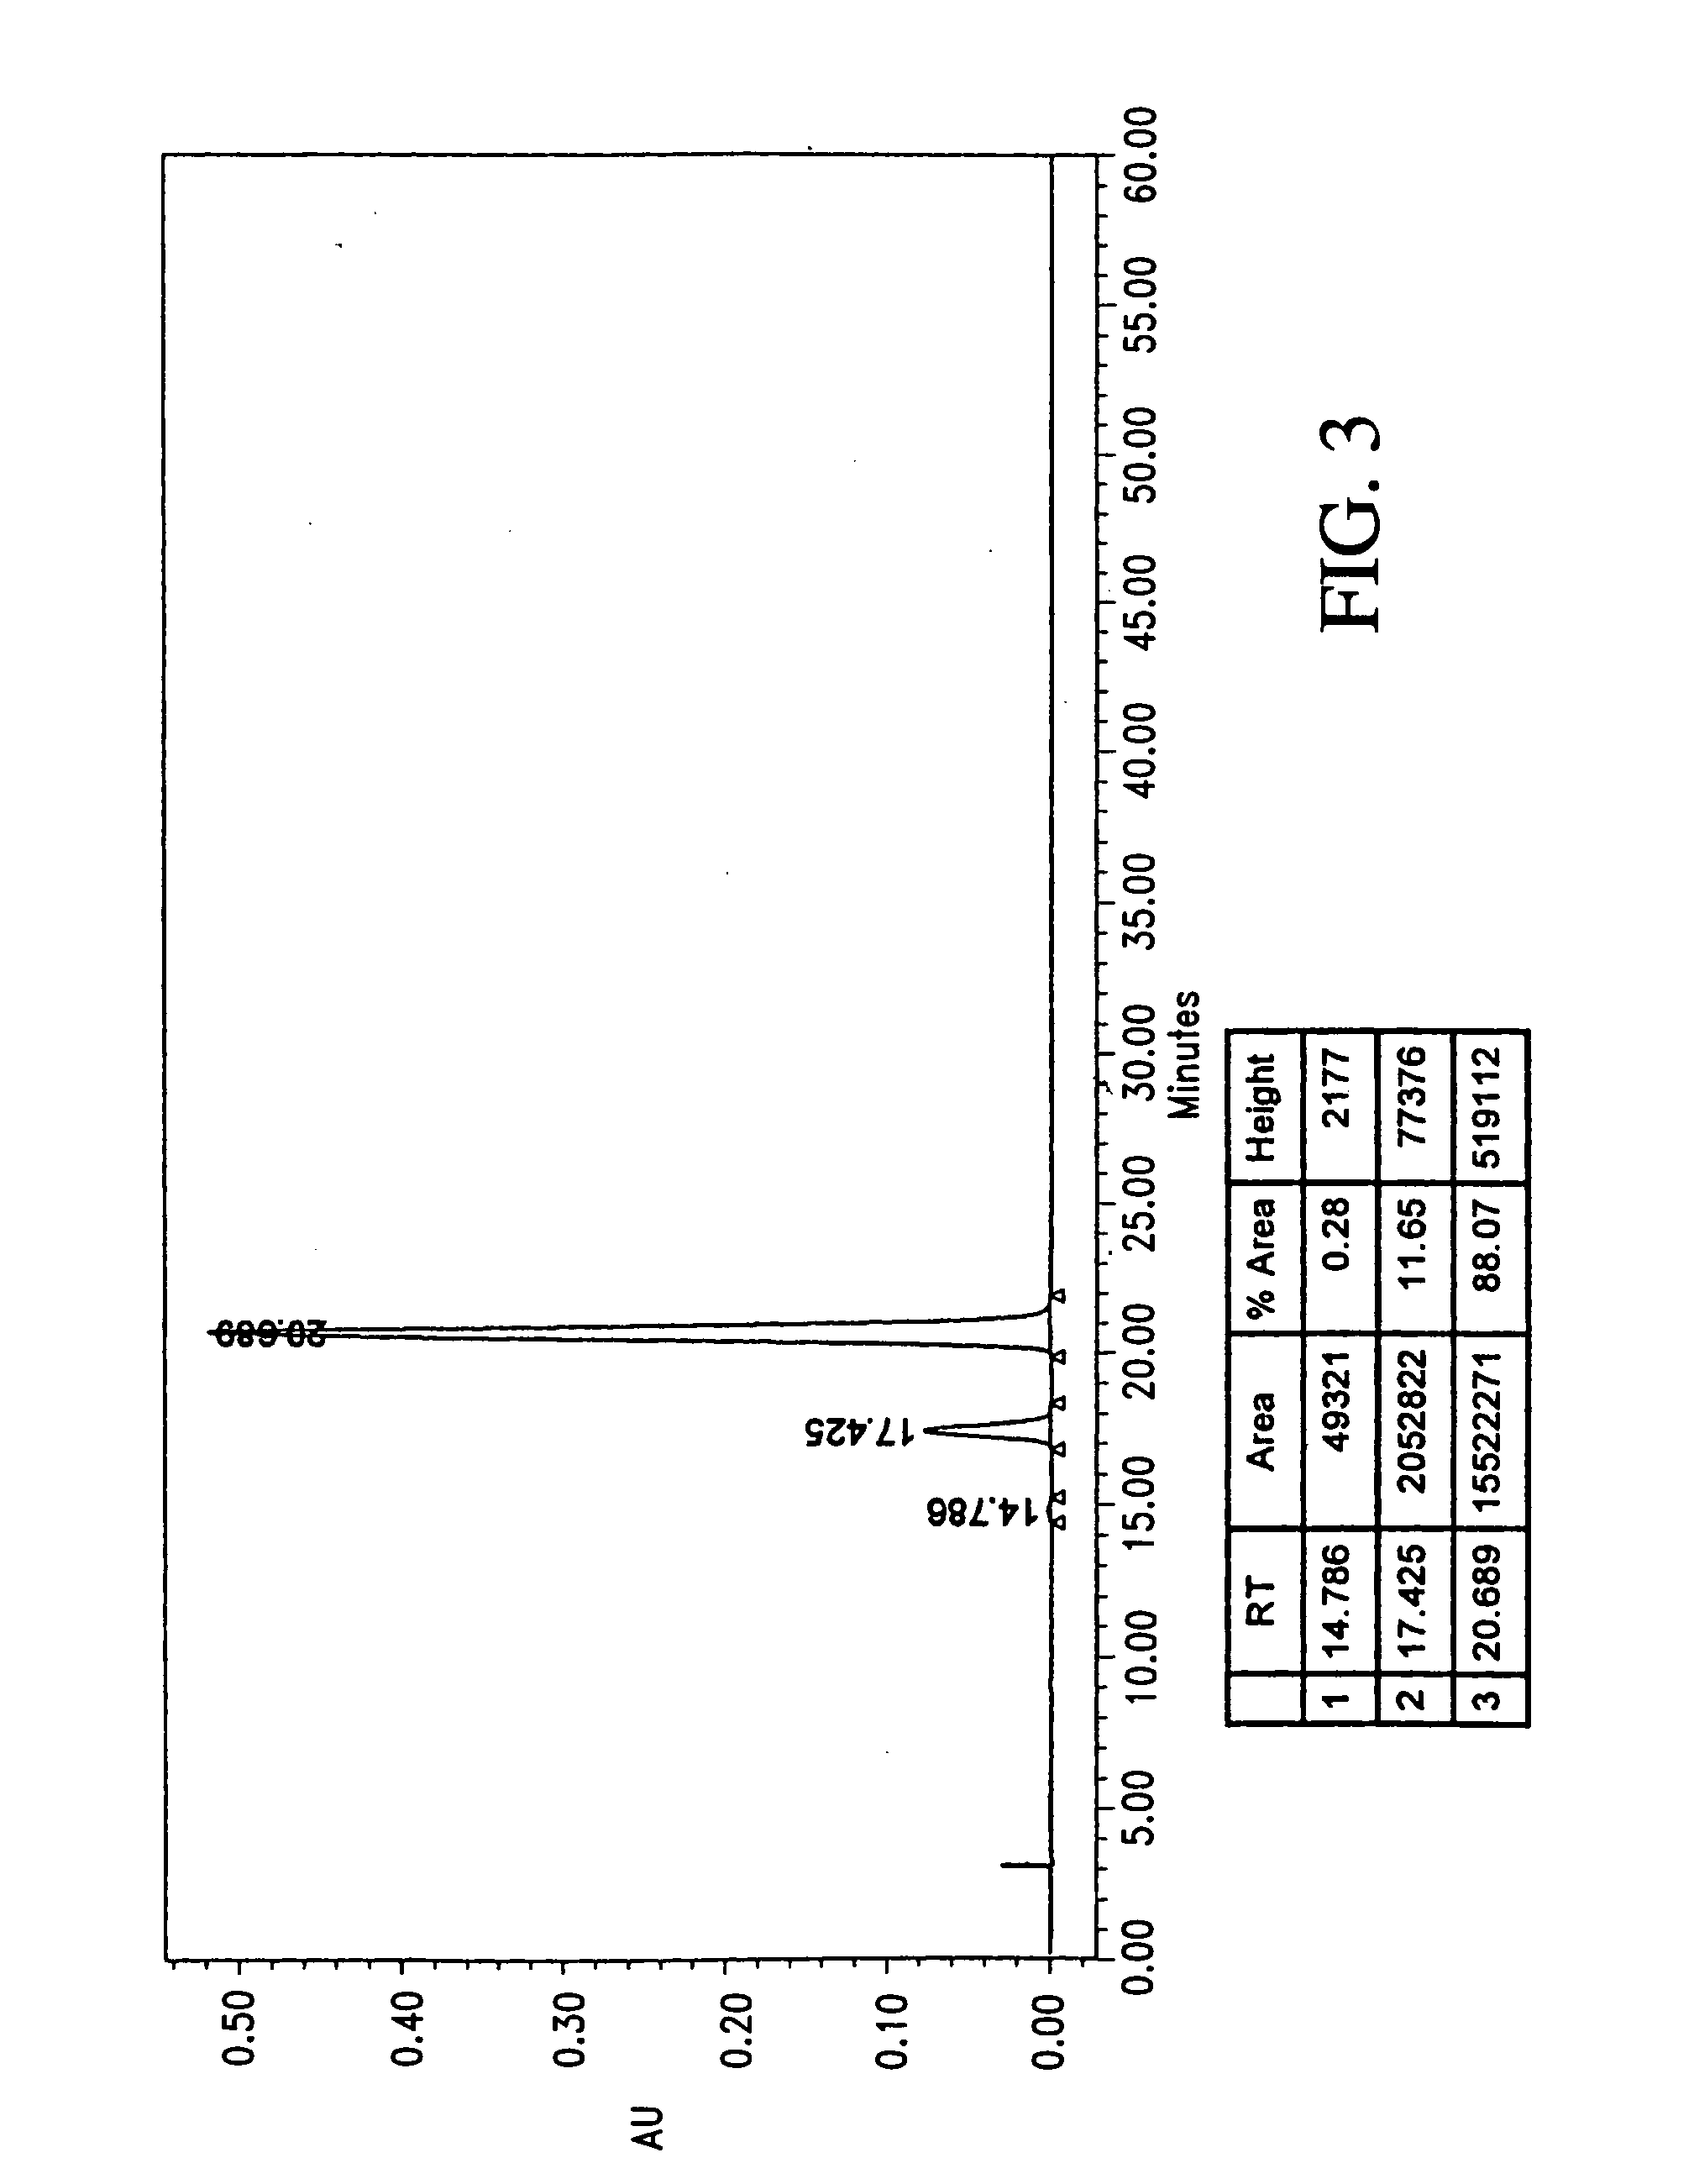 Method for preparing three types of benzidine compounds in a specific ratio